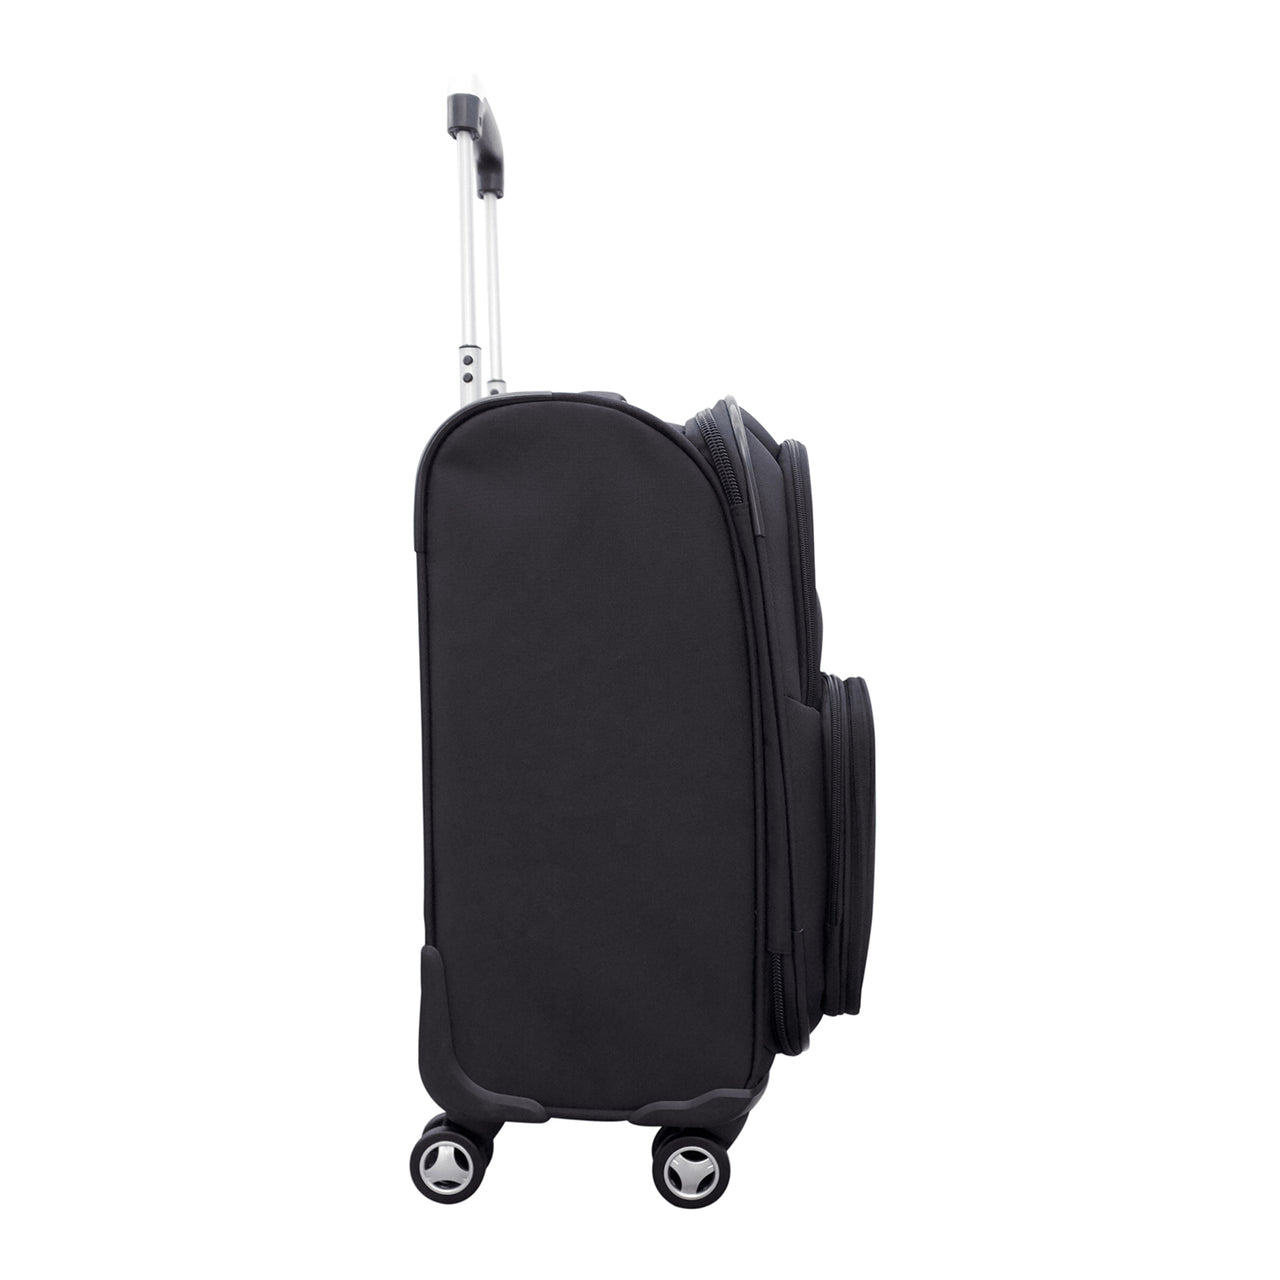 Nevada Wolf Pack 20" Carry-on Spinner Luggage